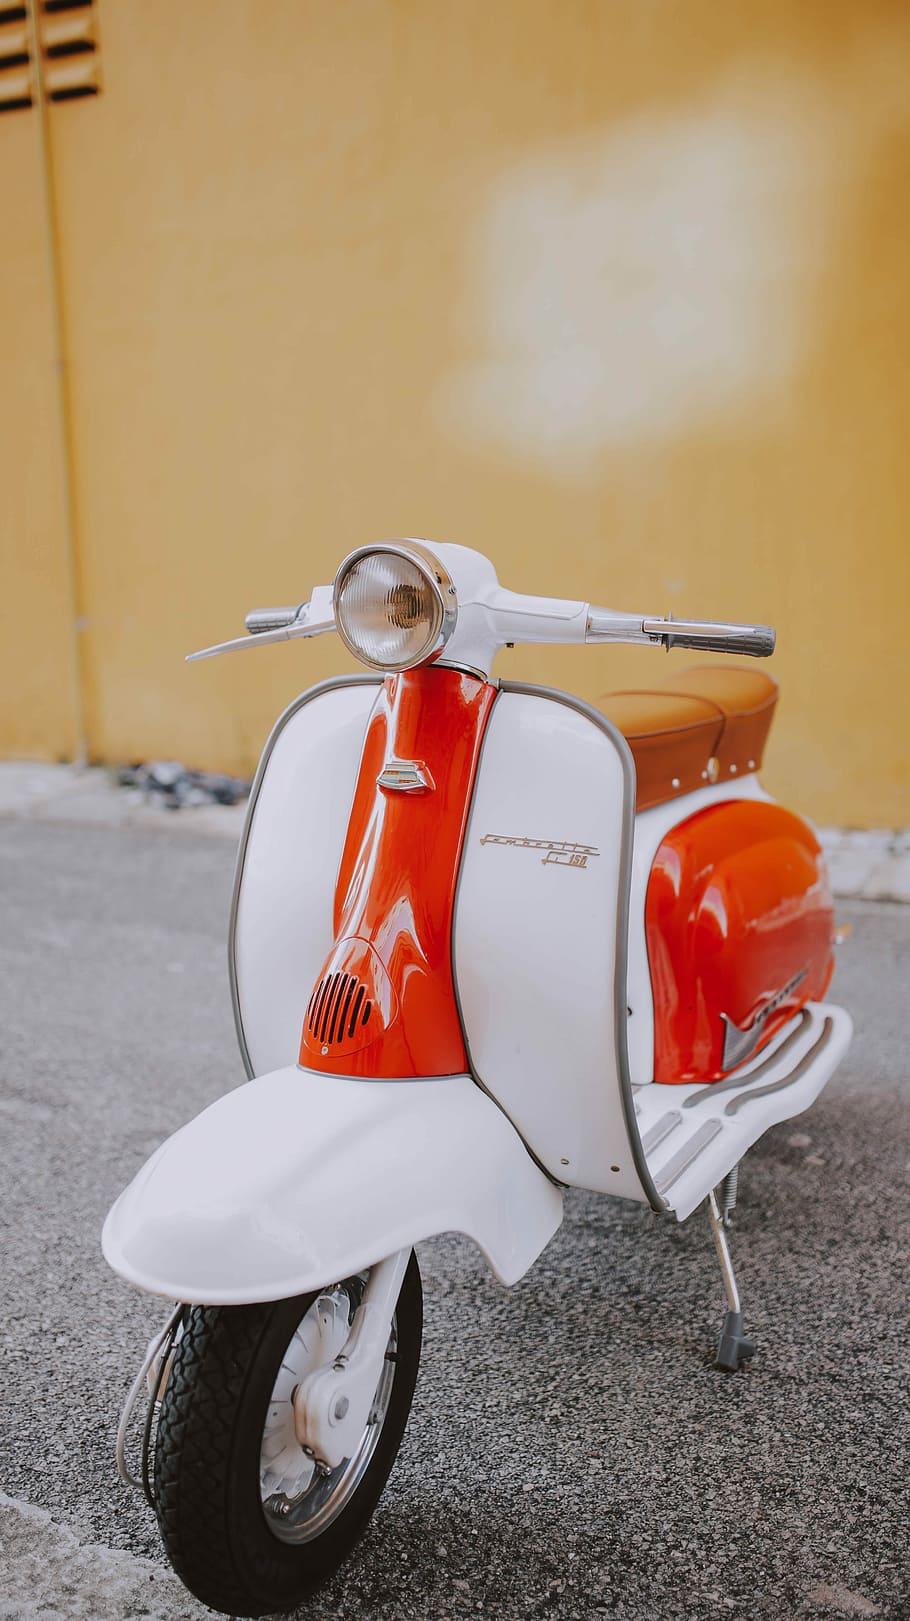 HD wallpaper: white and orange motor scooter on gray